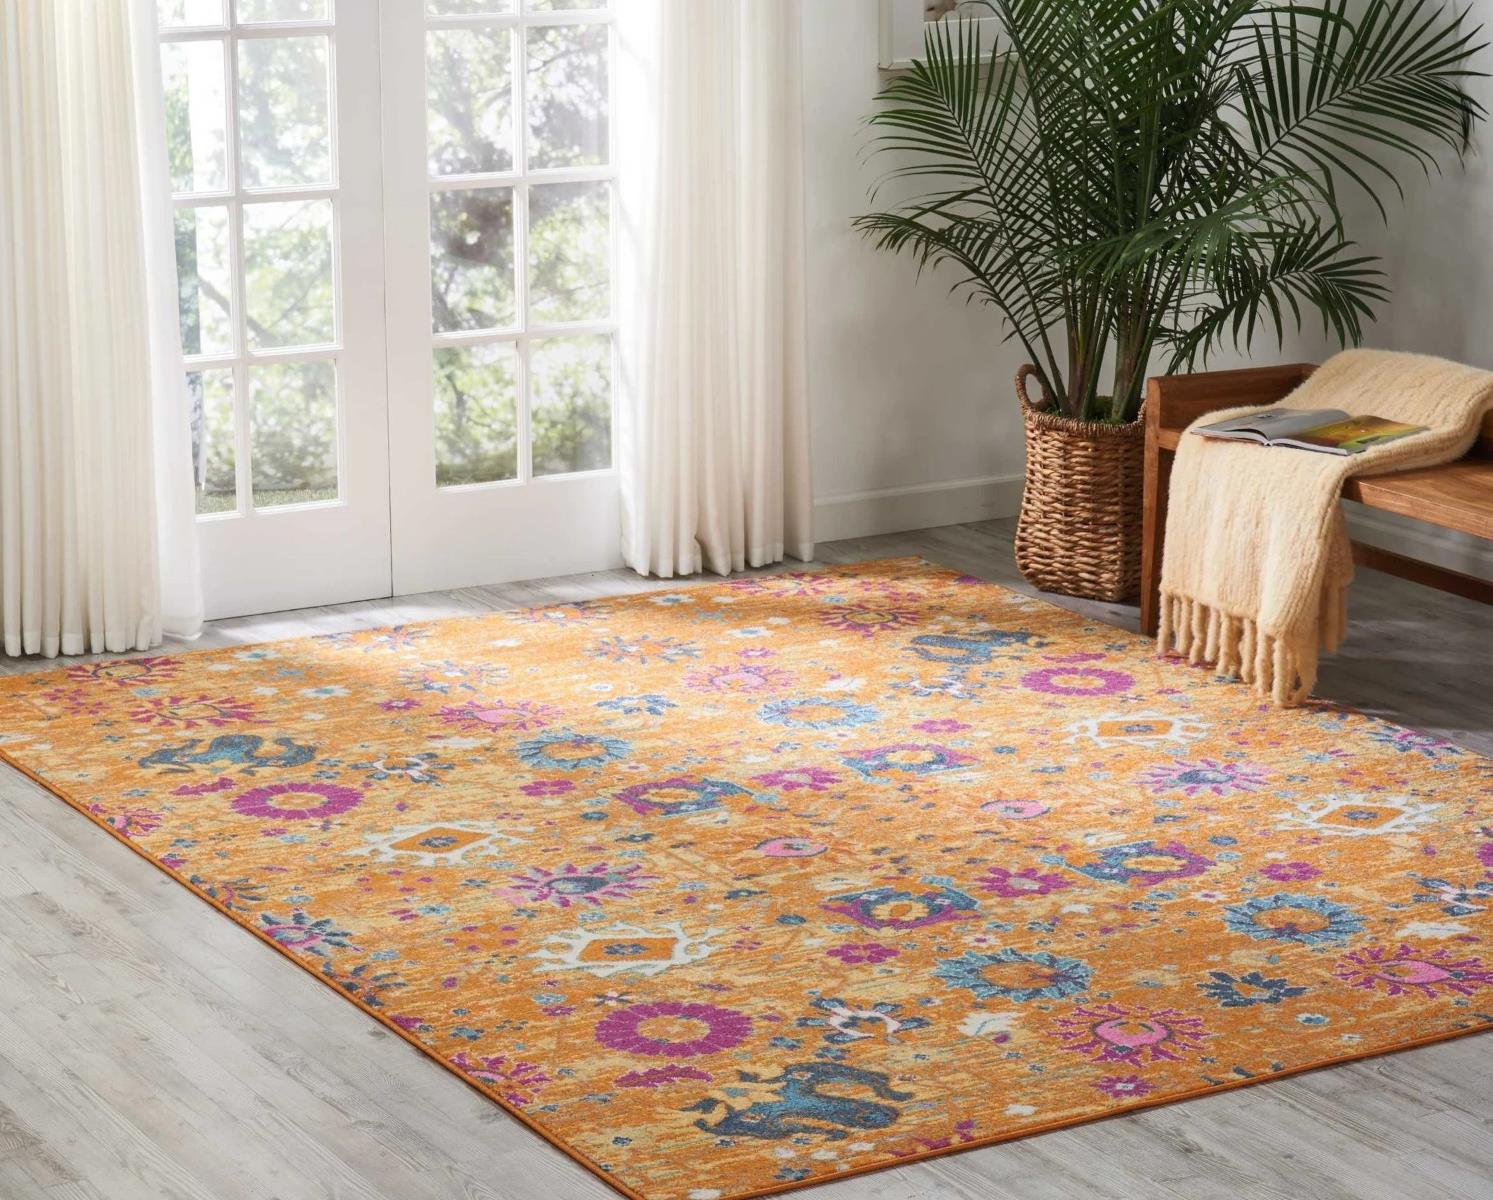 What Are Polypropylene Rugs